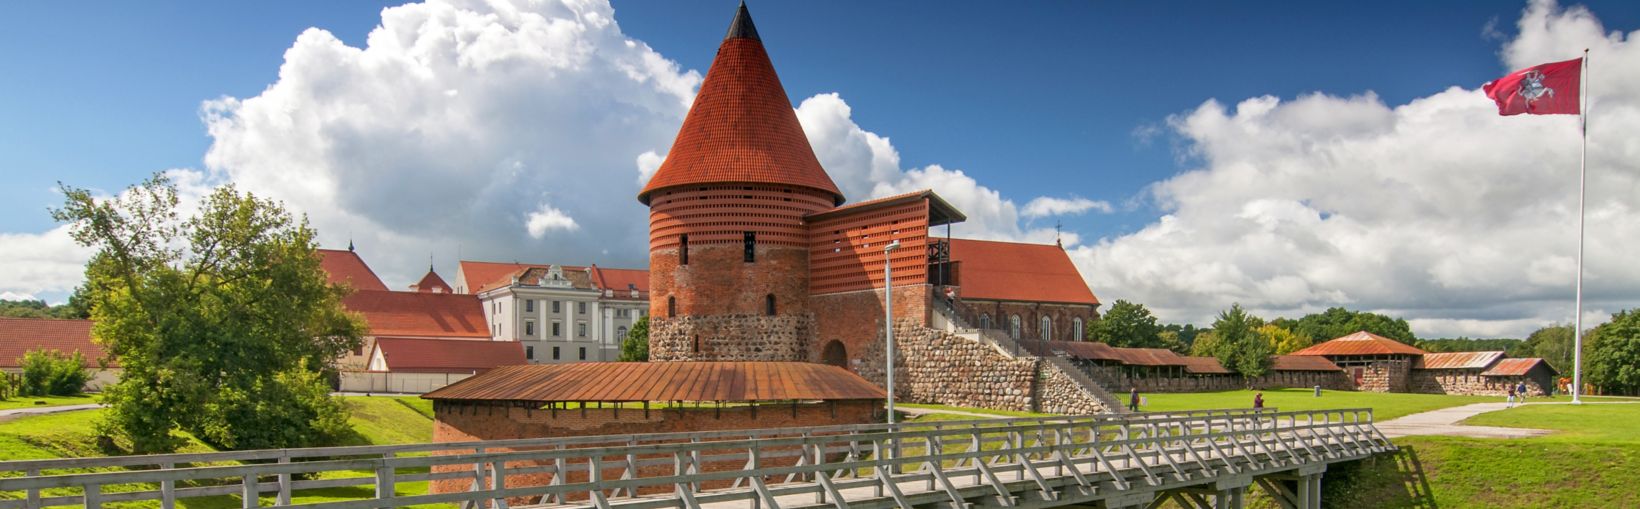 Kaunas Castle, built during the mid 14th century, in the Gothic style, Kaunas, Lithuania.